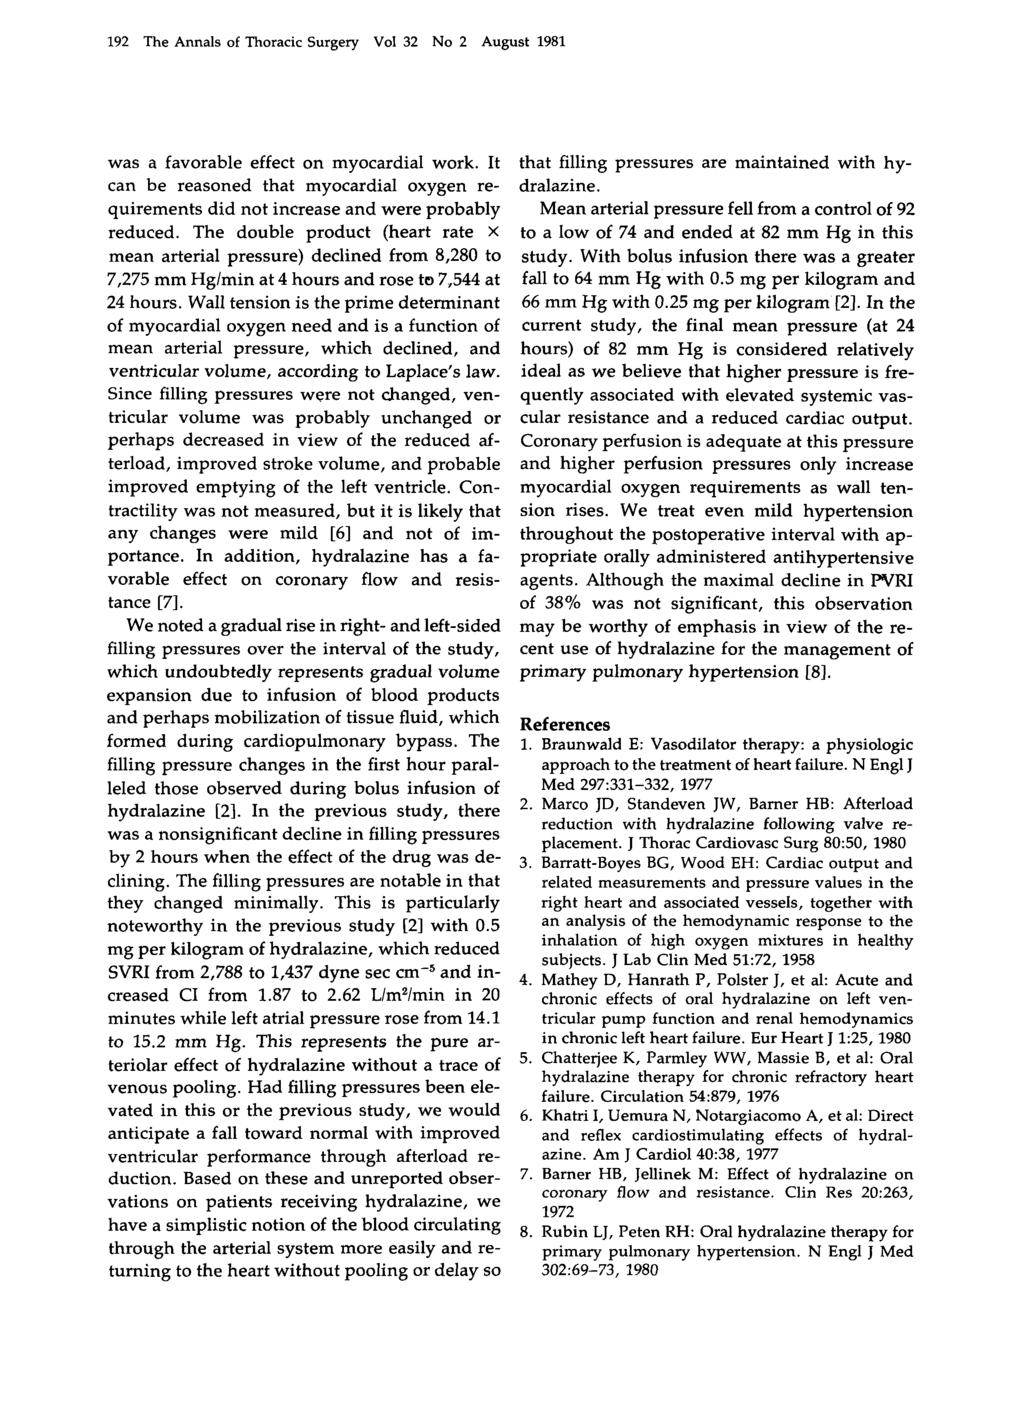 9 The Annals of Thoracic Surgery Vol 3 No August 98 was a favorable effect on myocardial work. It can be reasoned that myocardial oxygen requirements did not increase and were probably reduced.